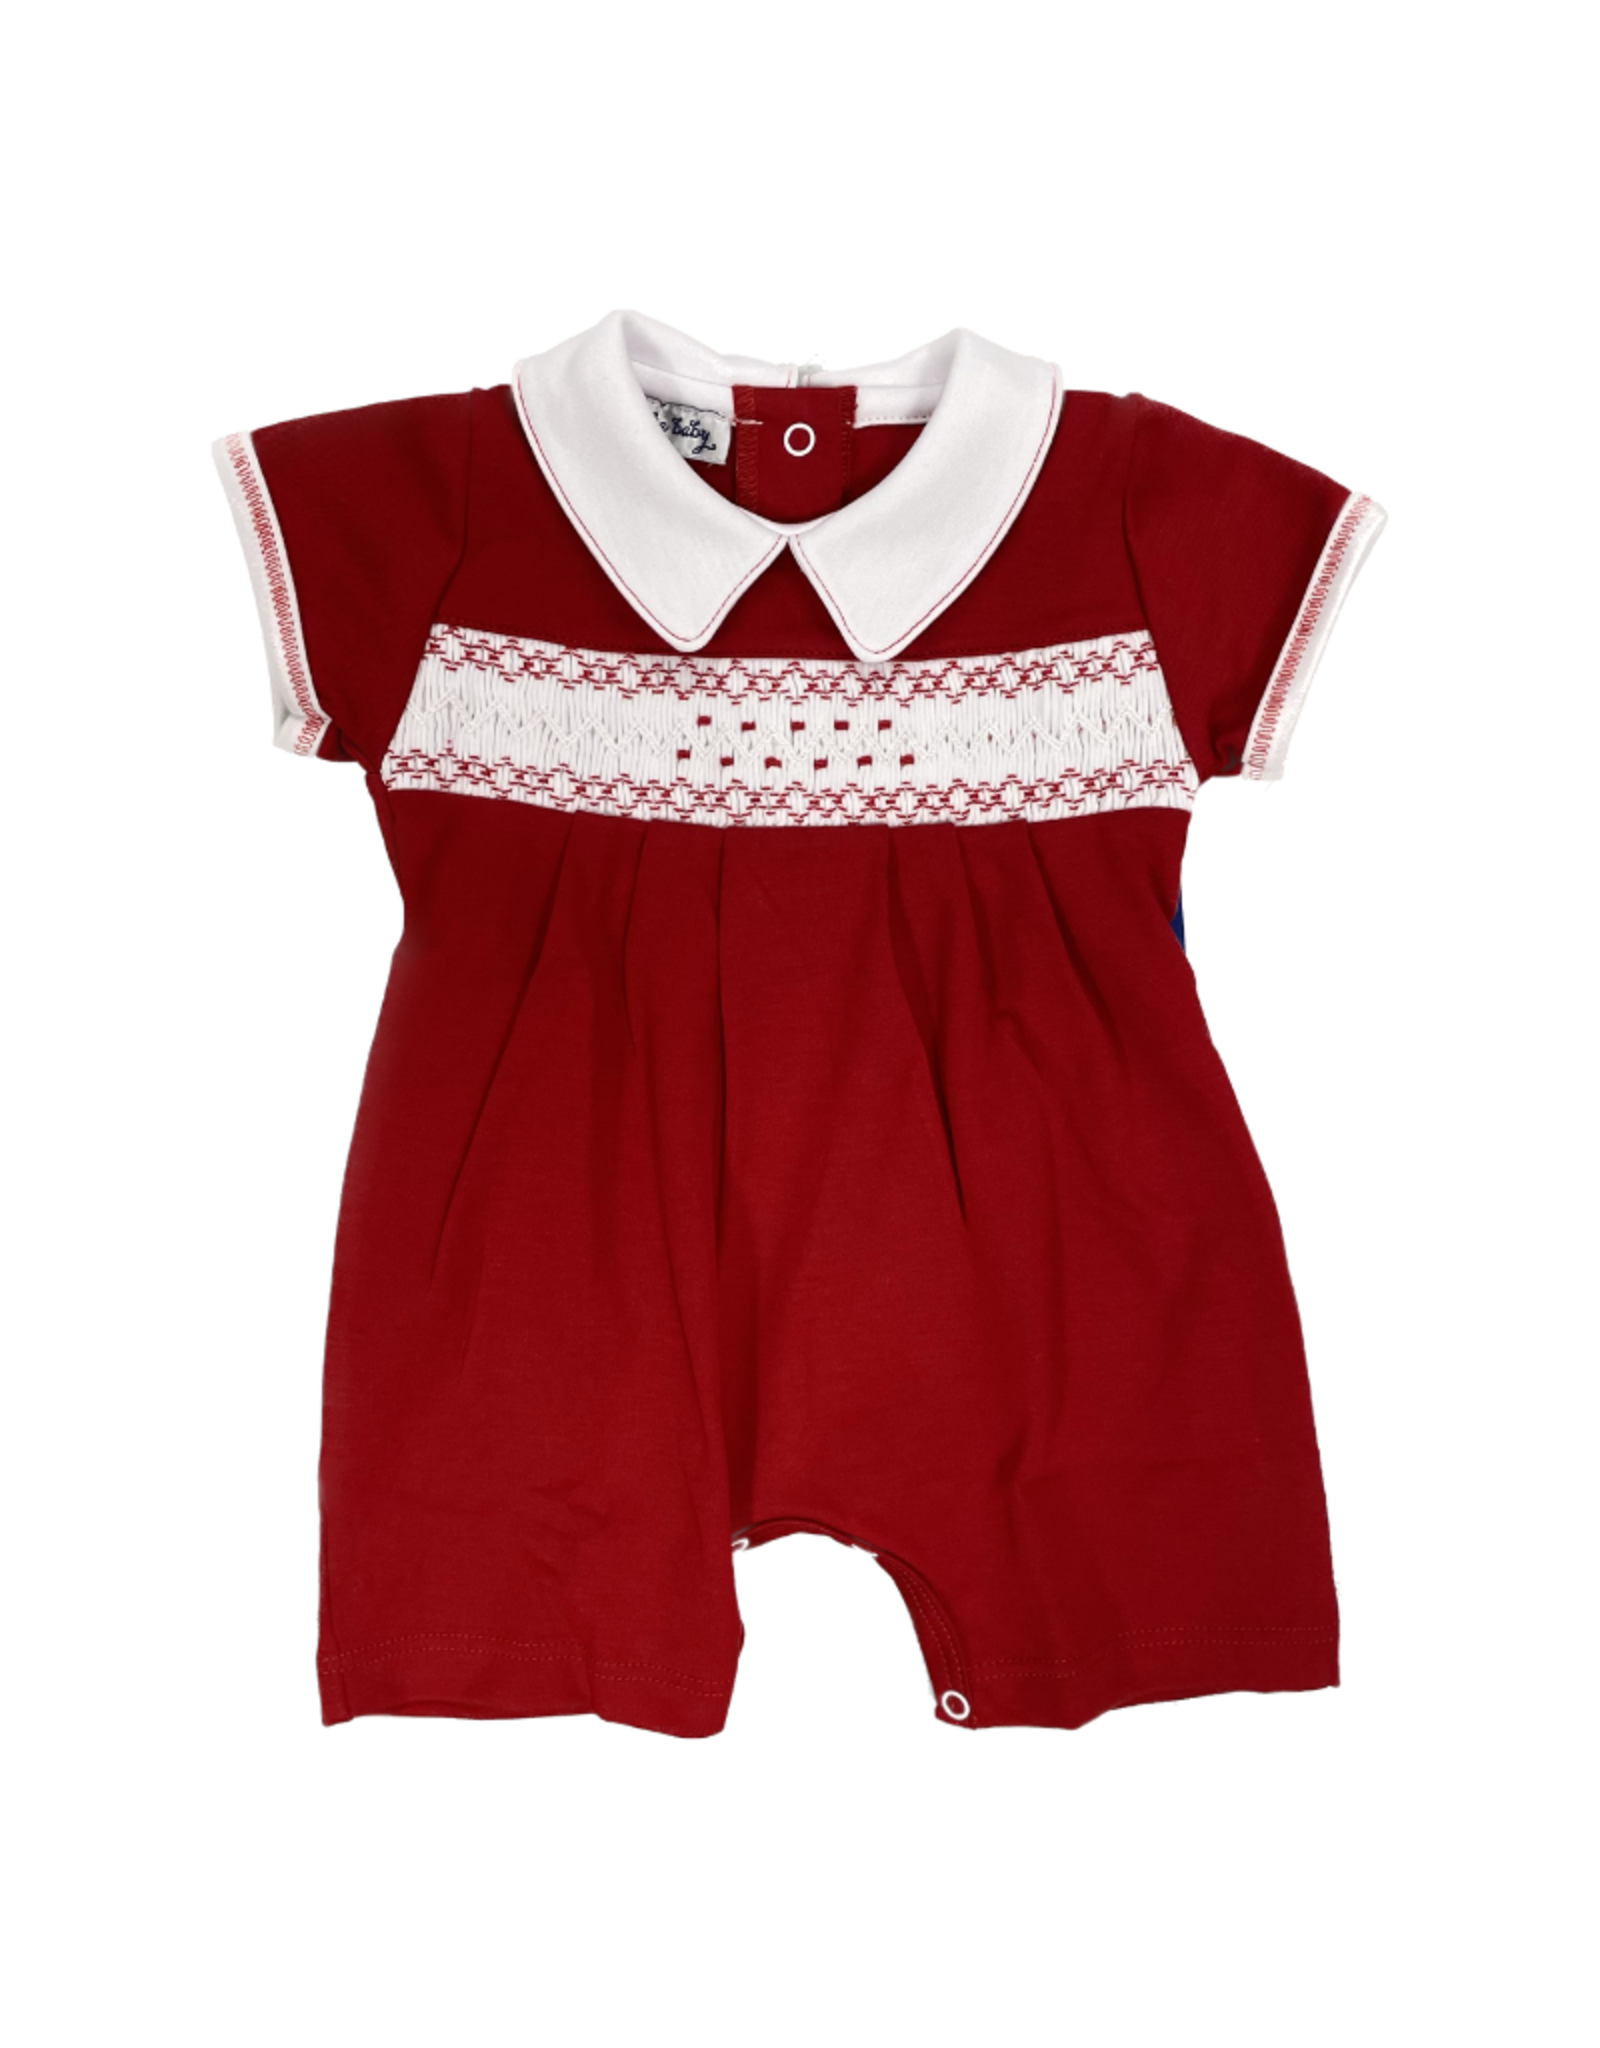 Magnolia Baby Cora Cooper Red Smock Collared Short Playsuit